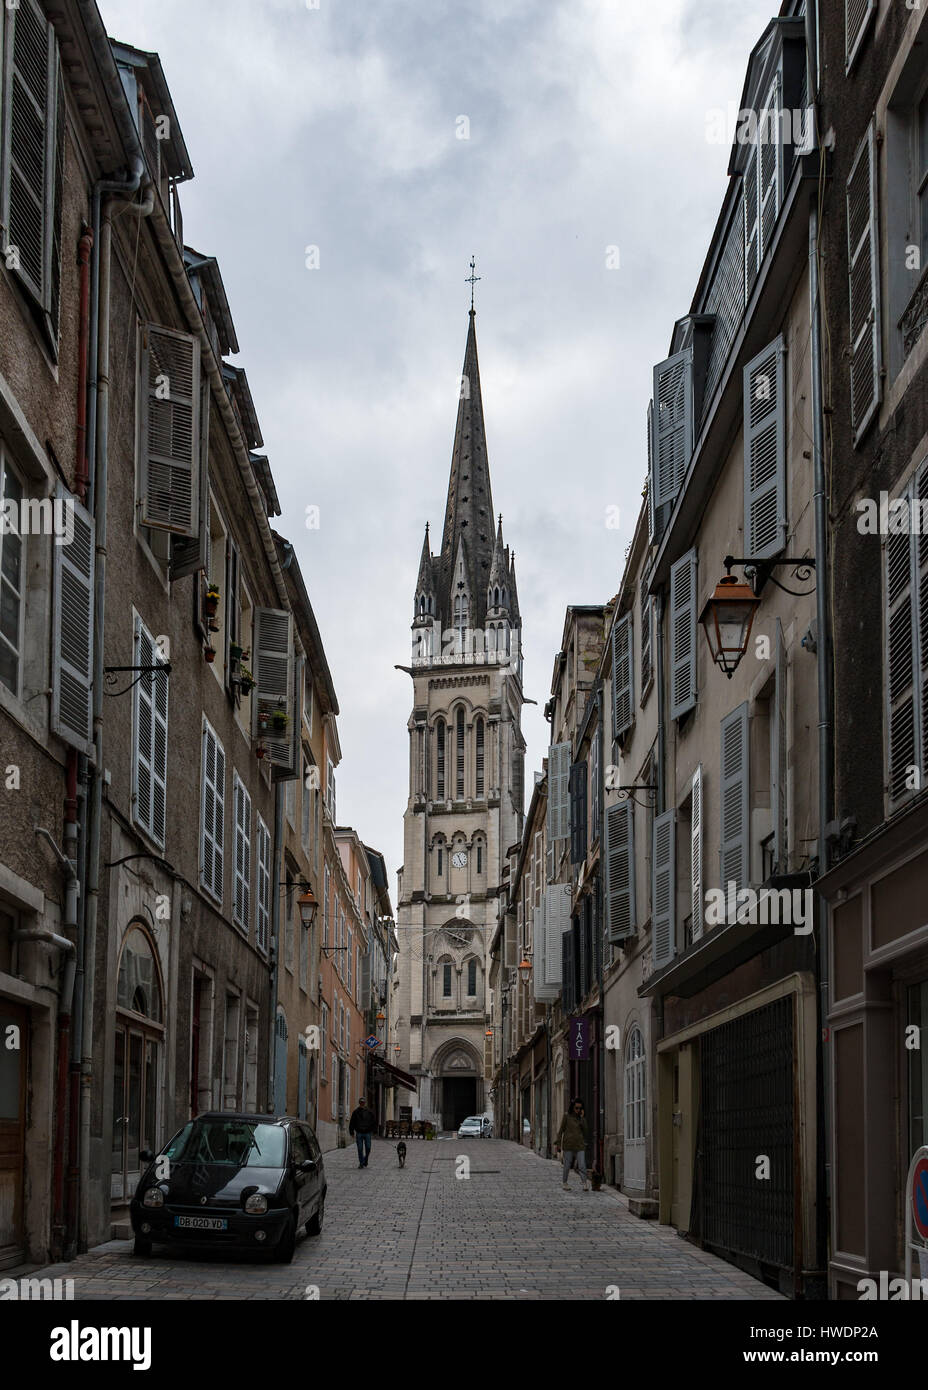 The church tower of the Eglise Saint Martin as seen from a narrow street in Pau, France Stock Photo